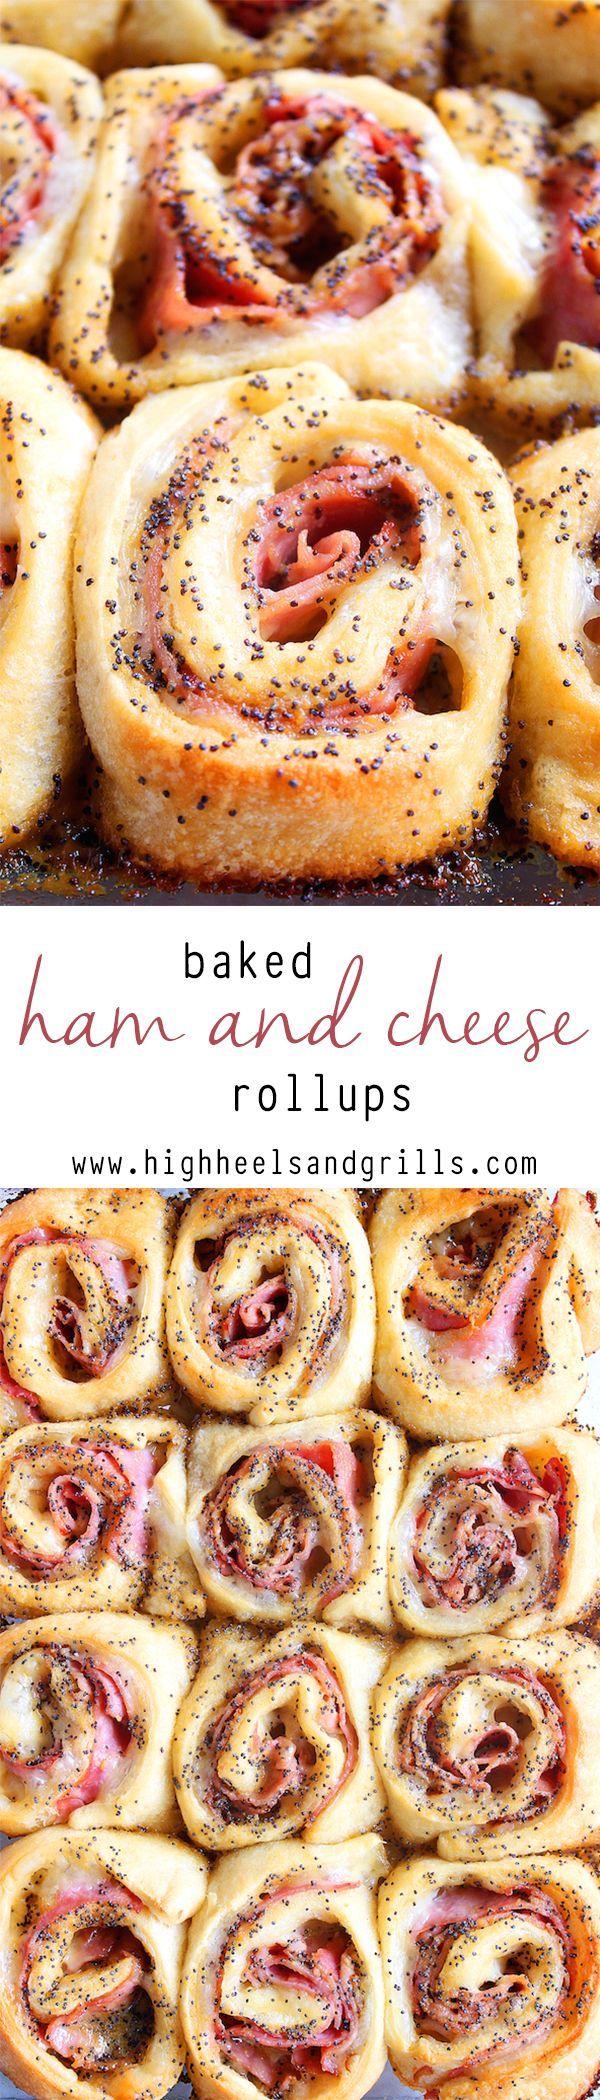 Wedding - Baked Ham And Cheese Rollups